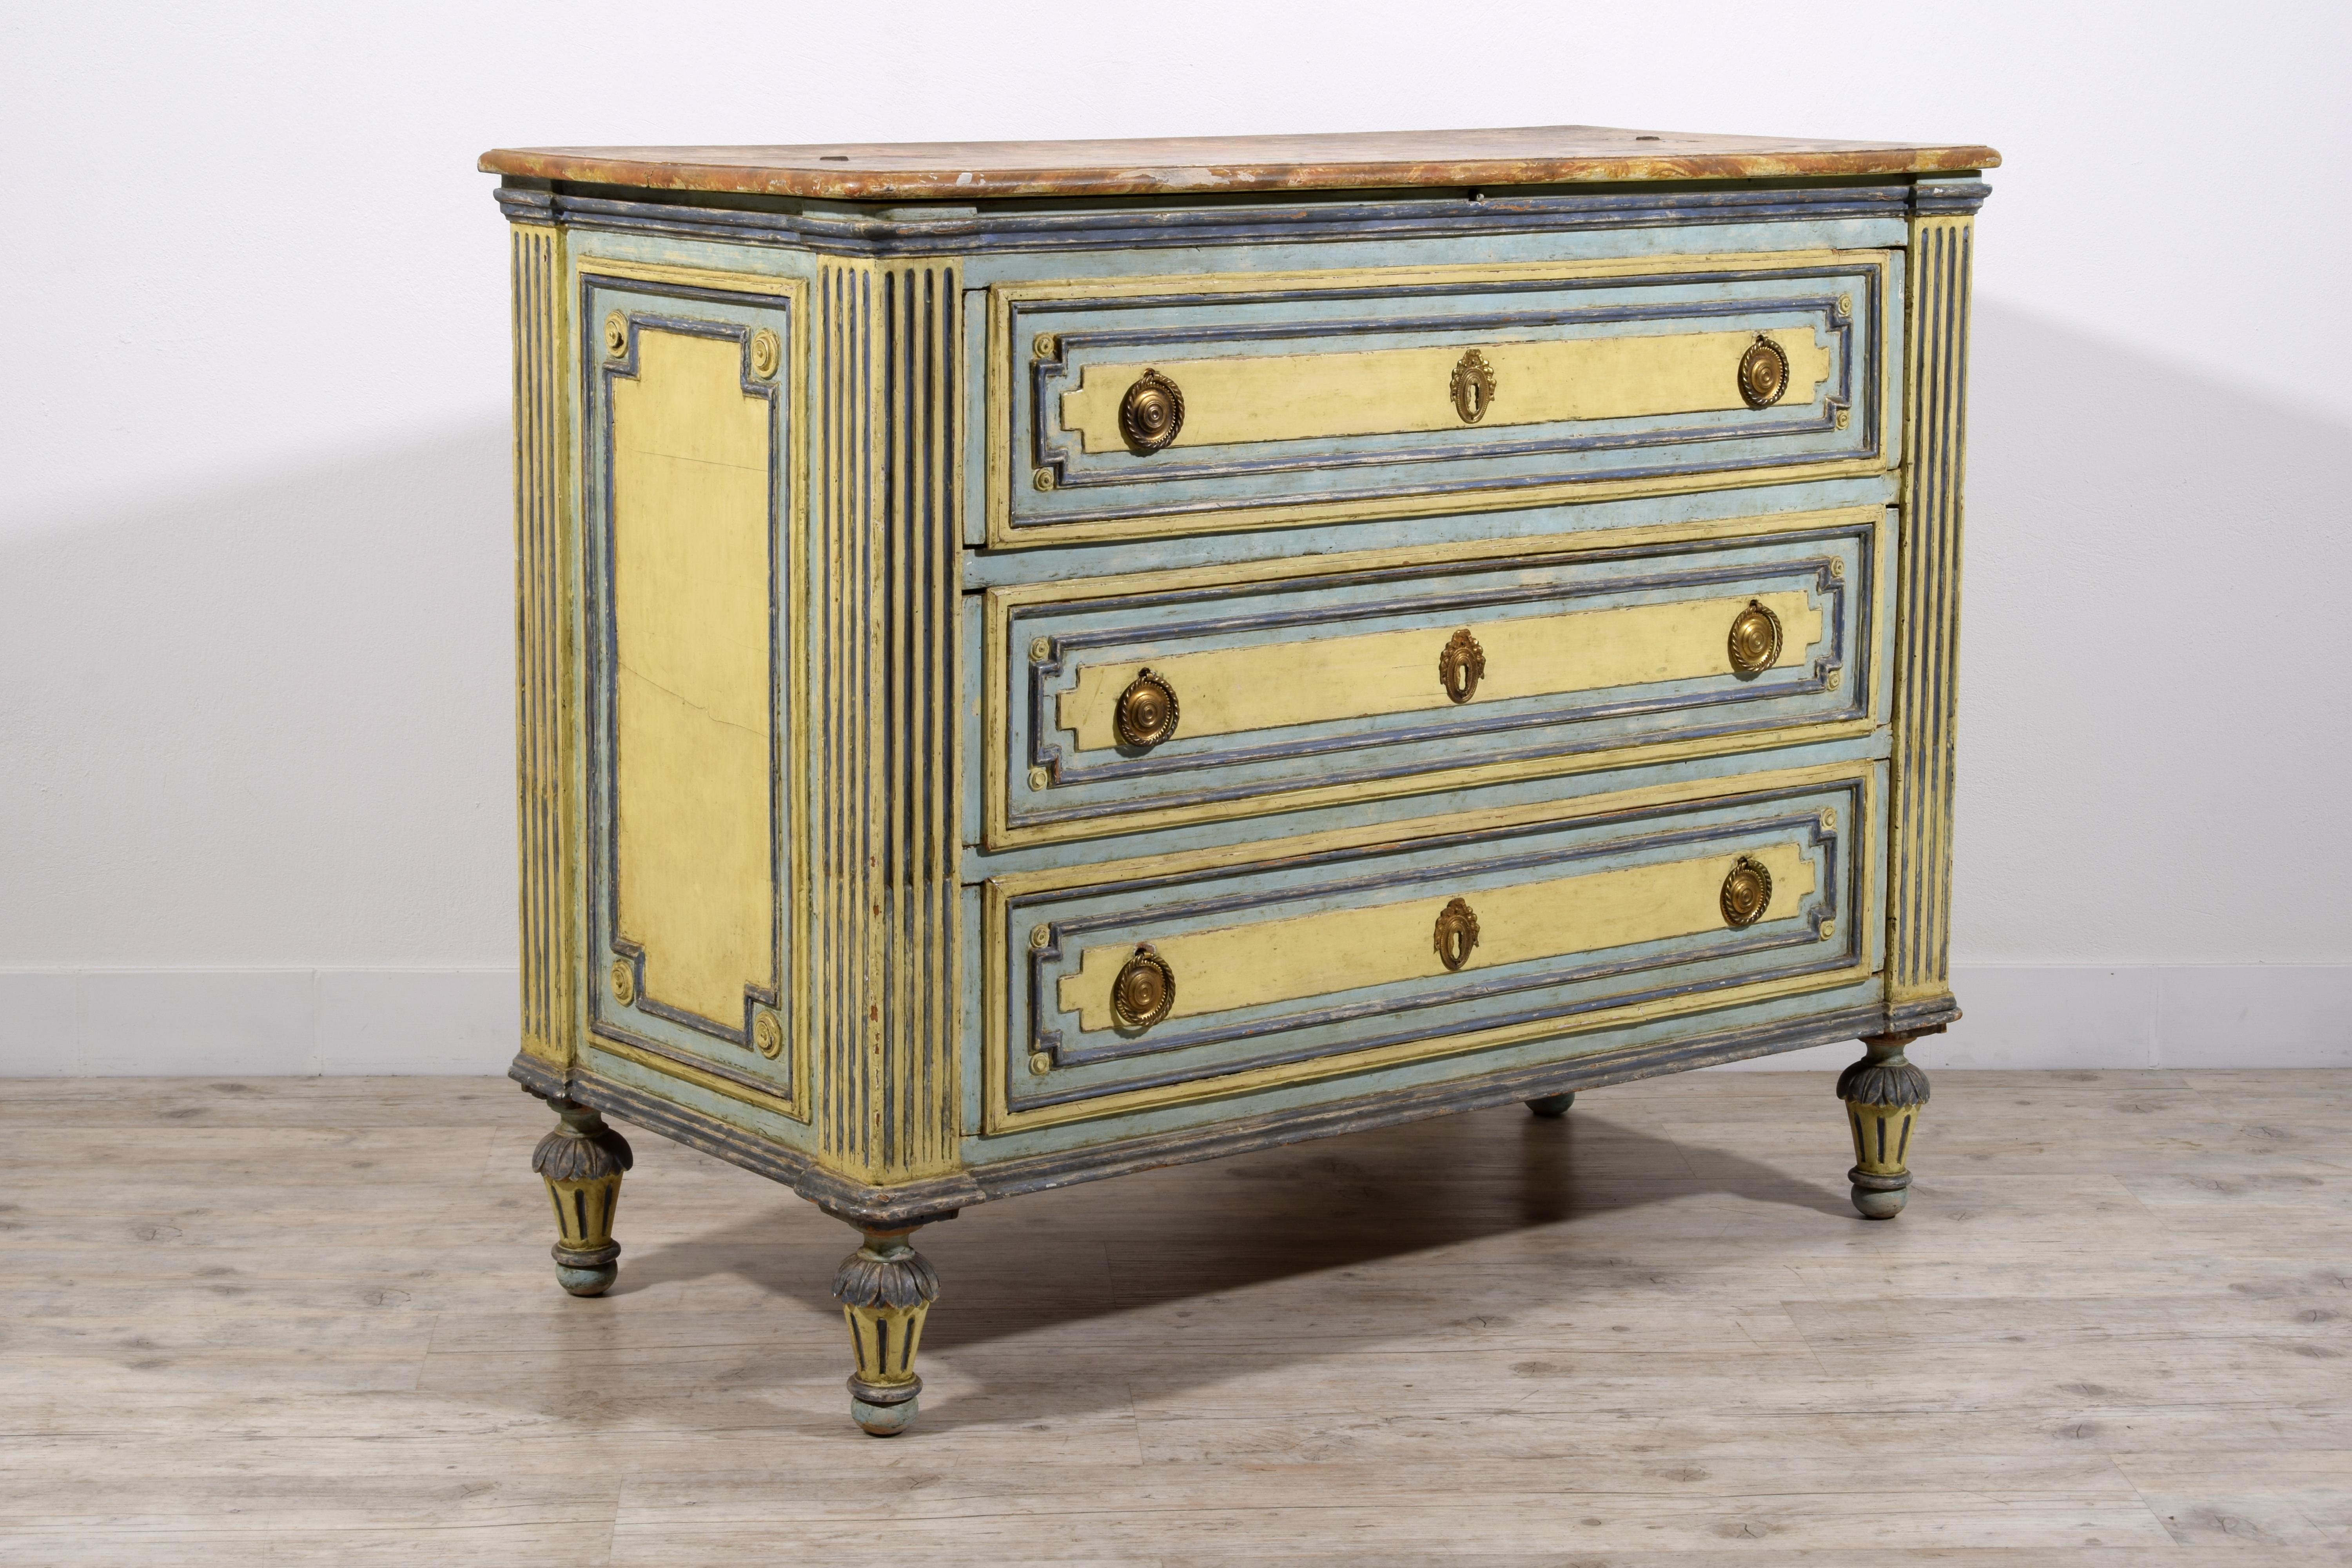 18th century, Italian Neoclassical Lacquered Wood Chest of Drawers  For Sale 1